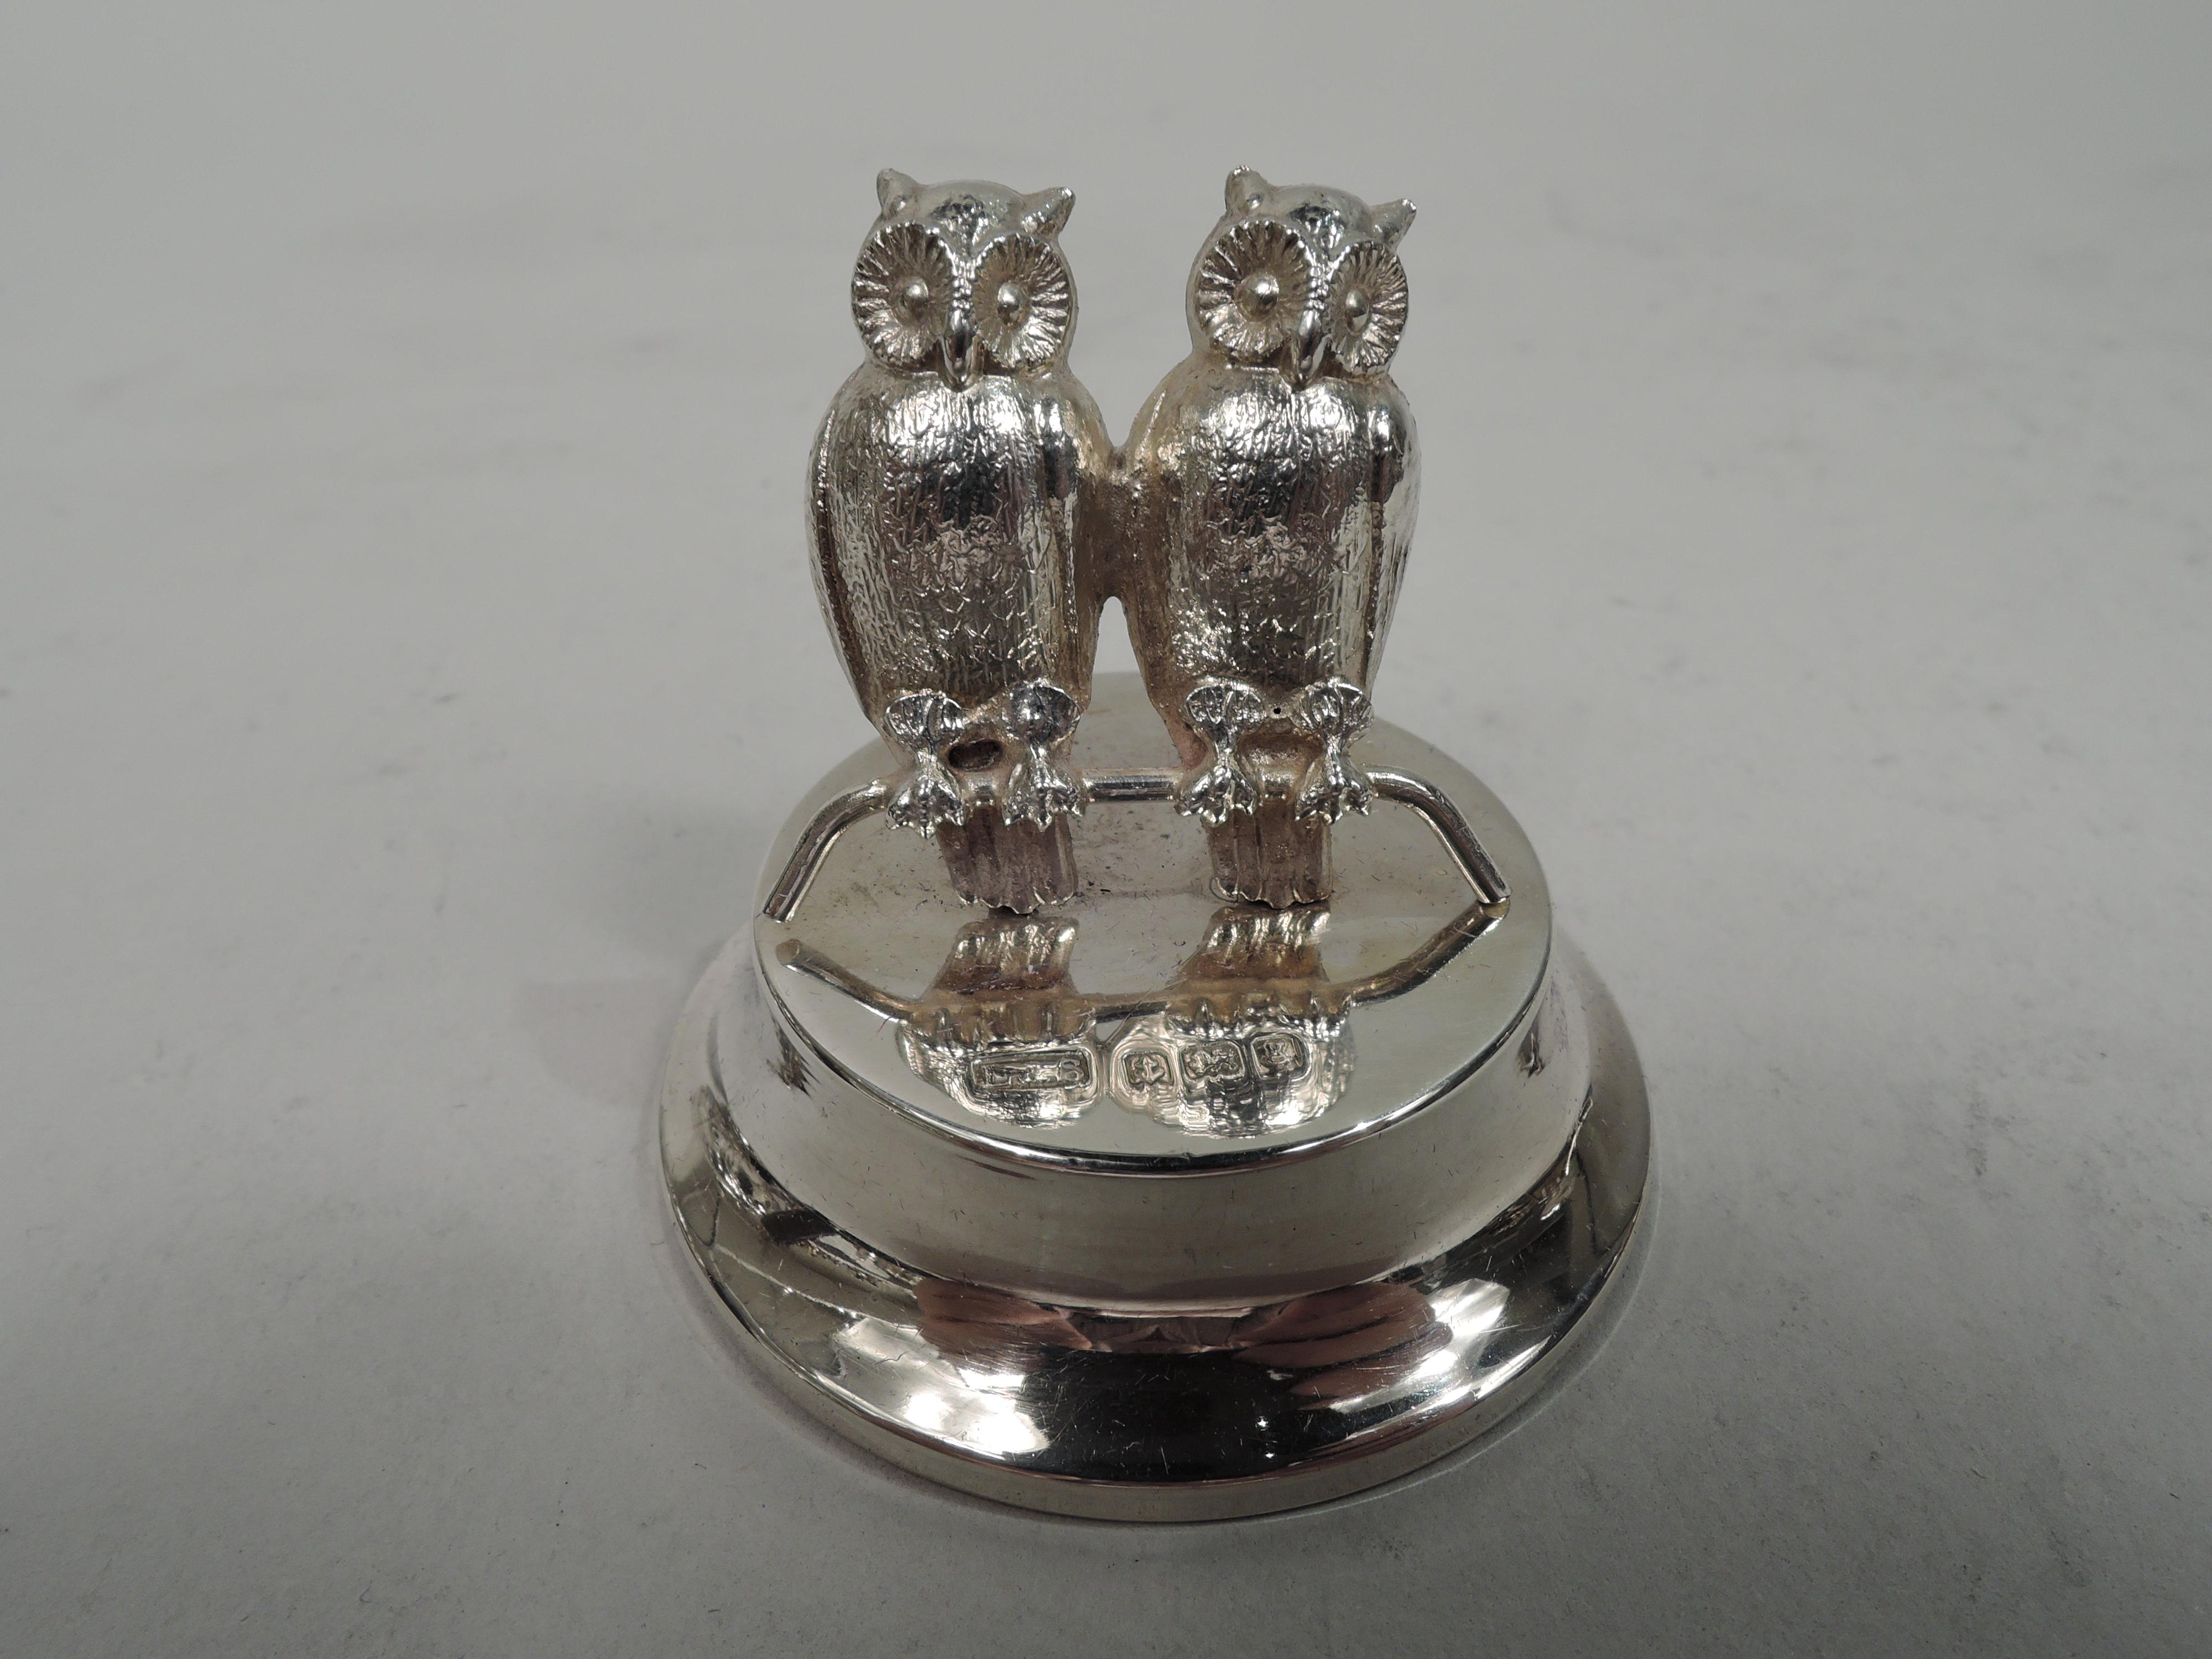 Set of 4 English Edwardian Figural Wise Bird Owl Place Card Holders In Good Condition For Sale In New York, NY